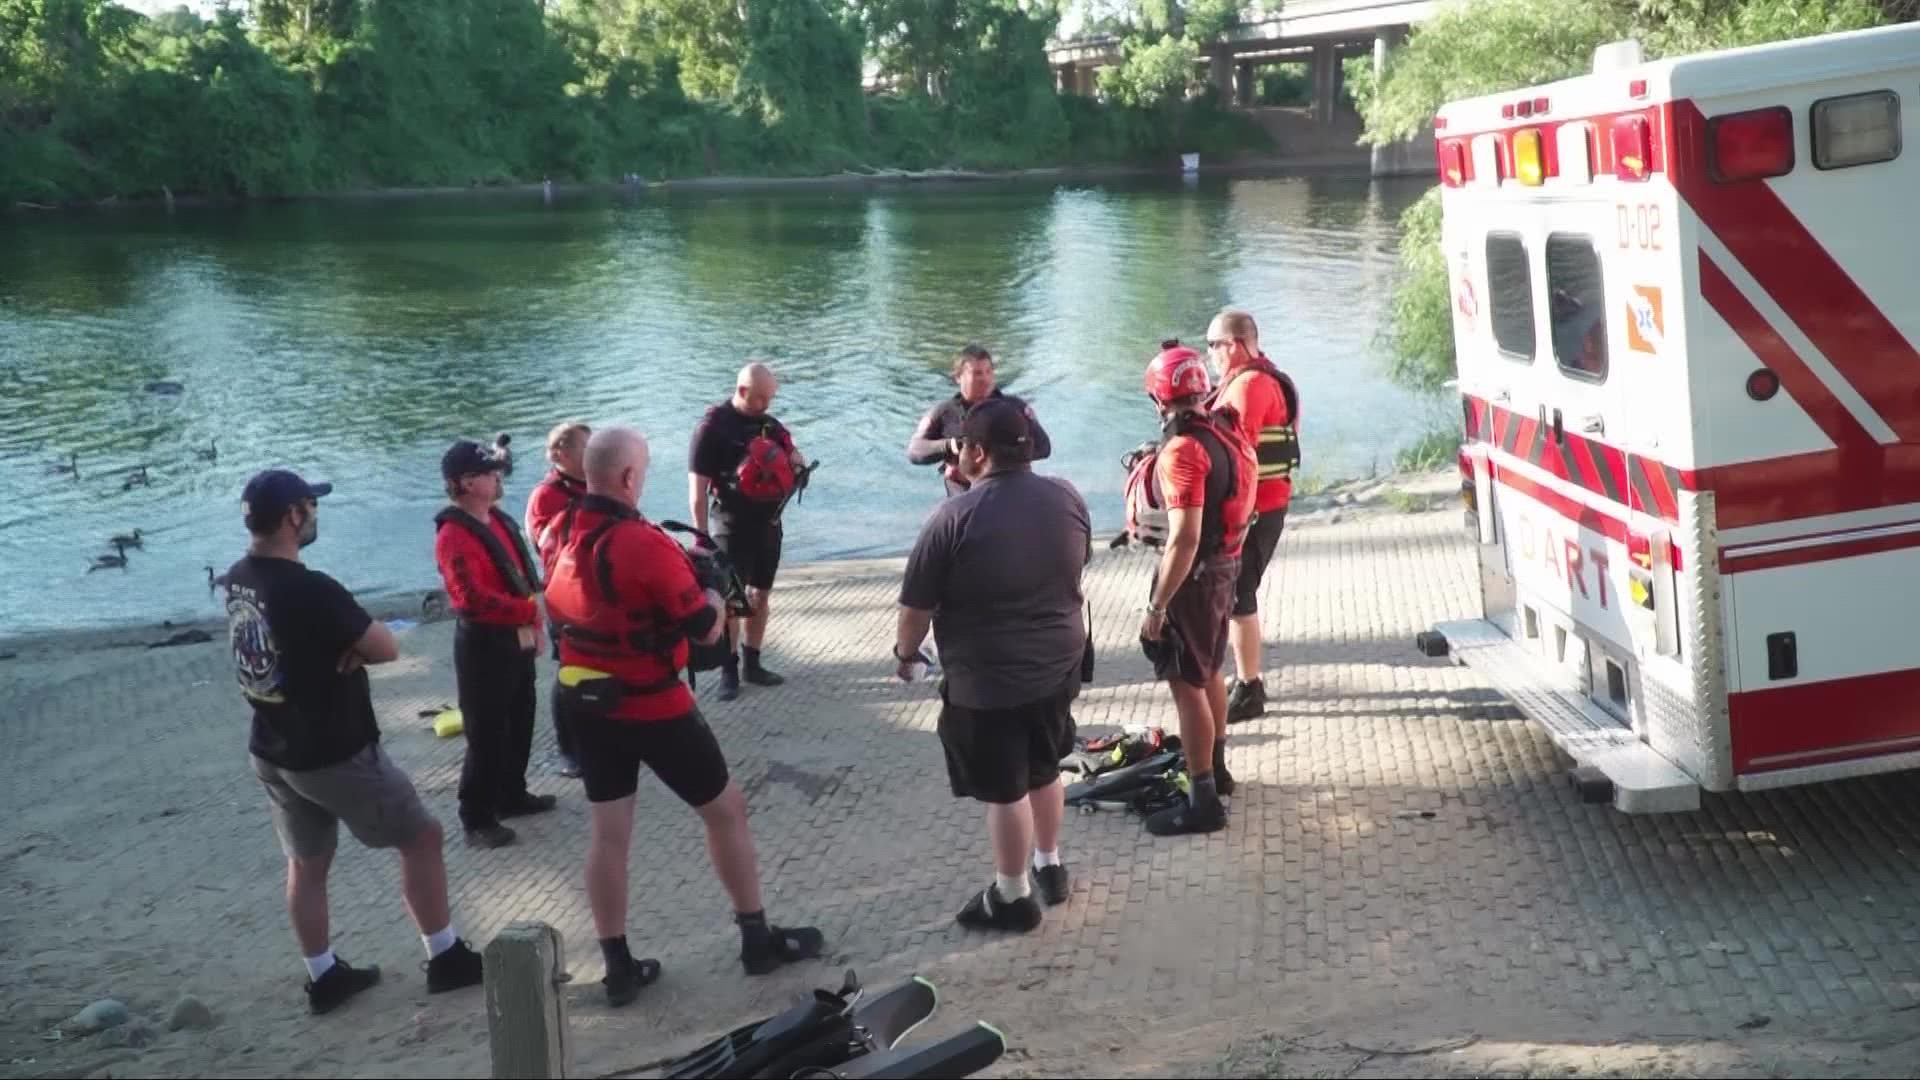 So far in 2022, there have already been multiple drownings in the Sacramento area. The Drowning Accident Rescue Team (D.A.R.T.) takes ABC10 through its training.